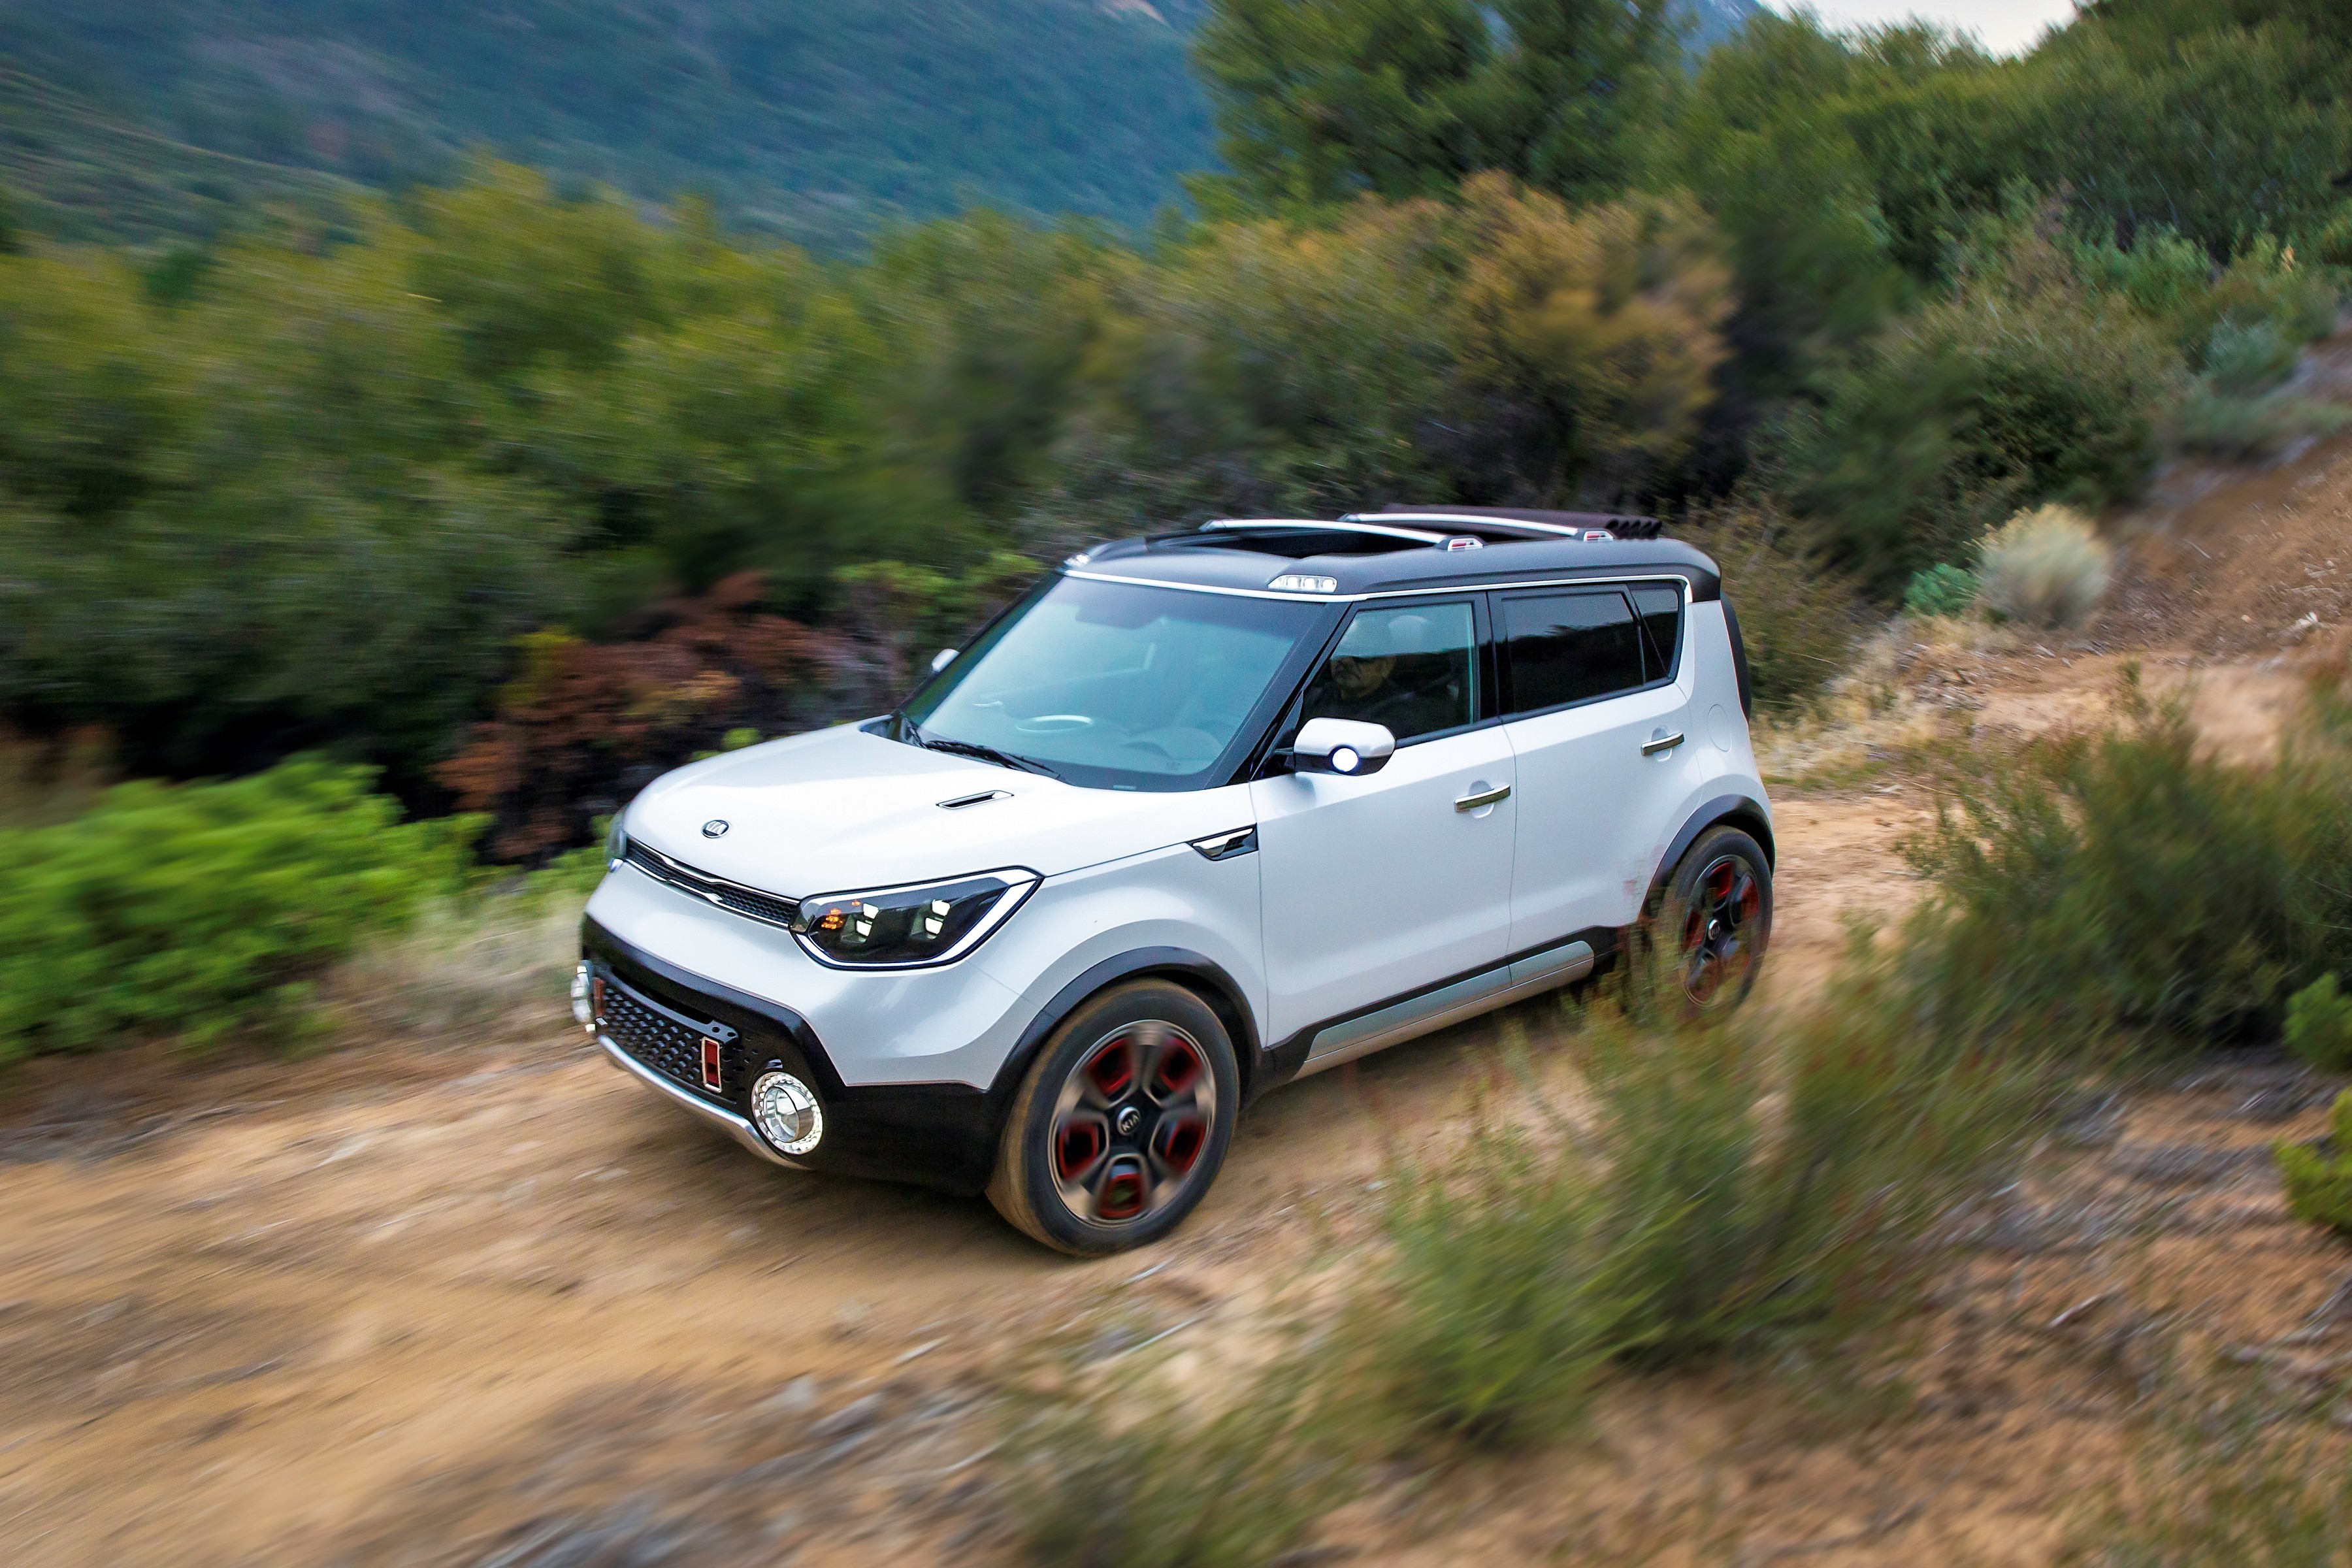 KIA Soul accessories specifications